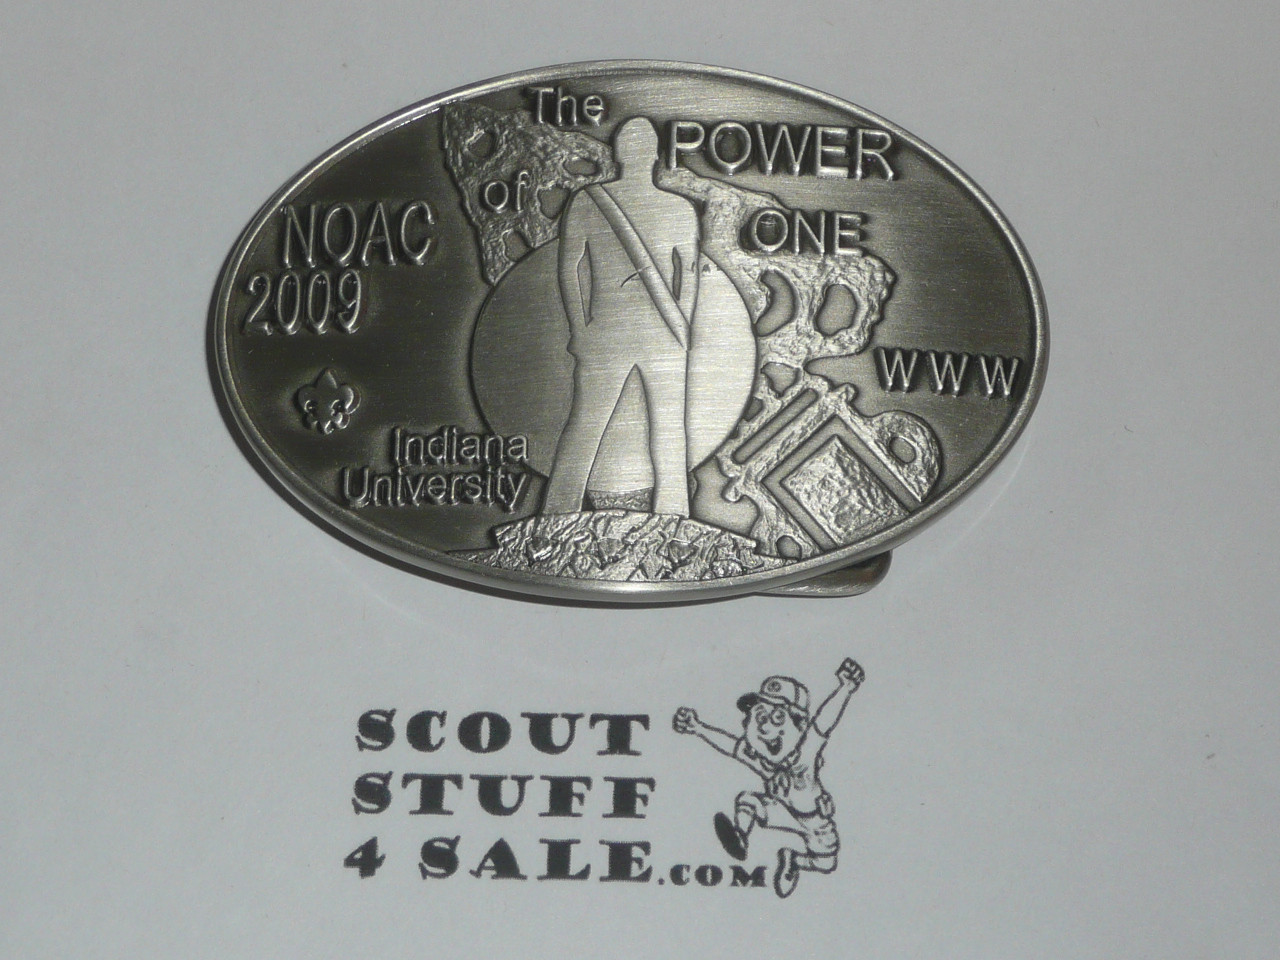 National Order of the Arrow Conference (NOAC), 2009 Cast Belt Buckle